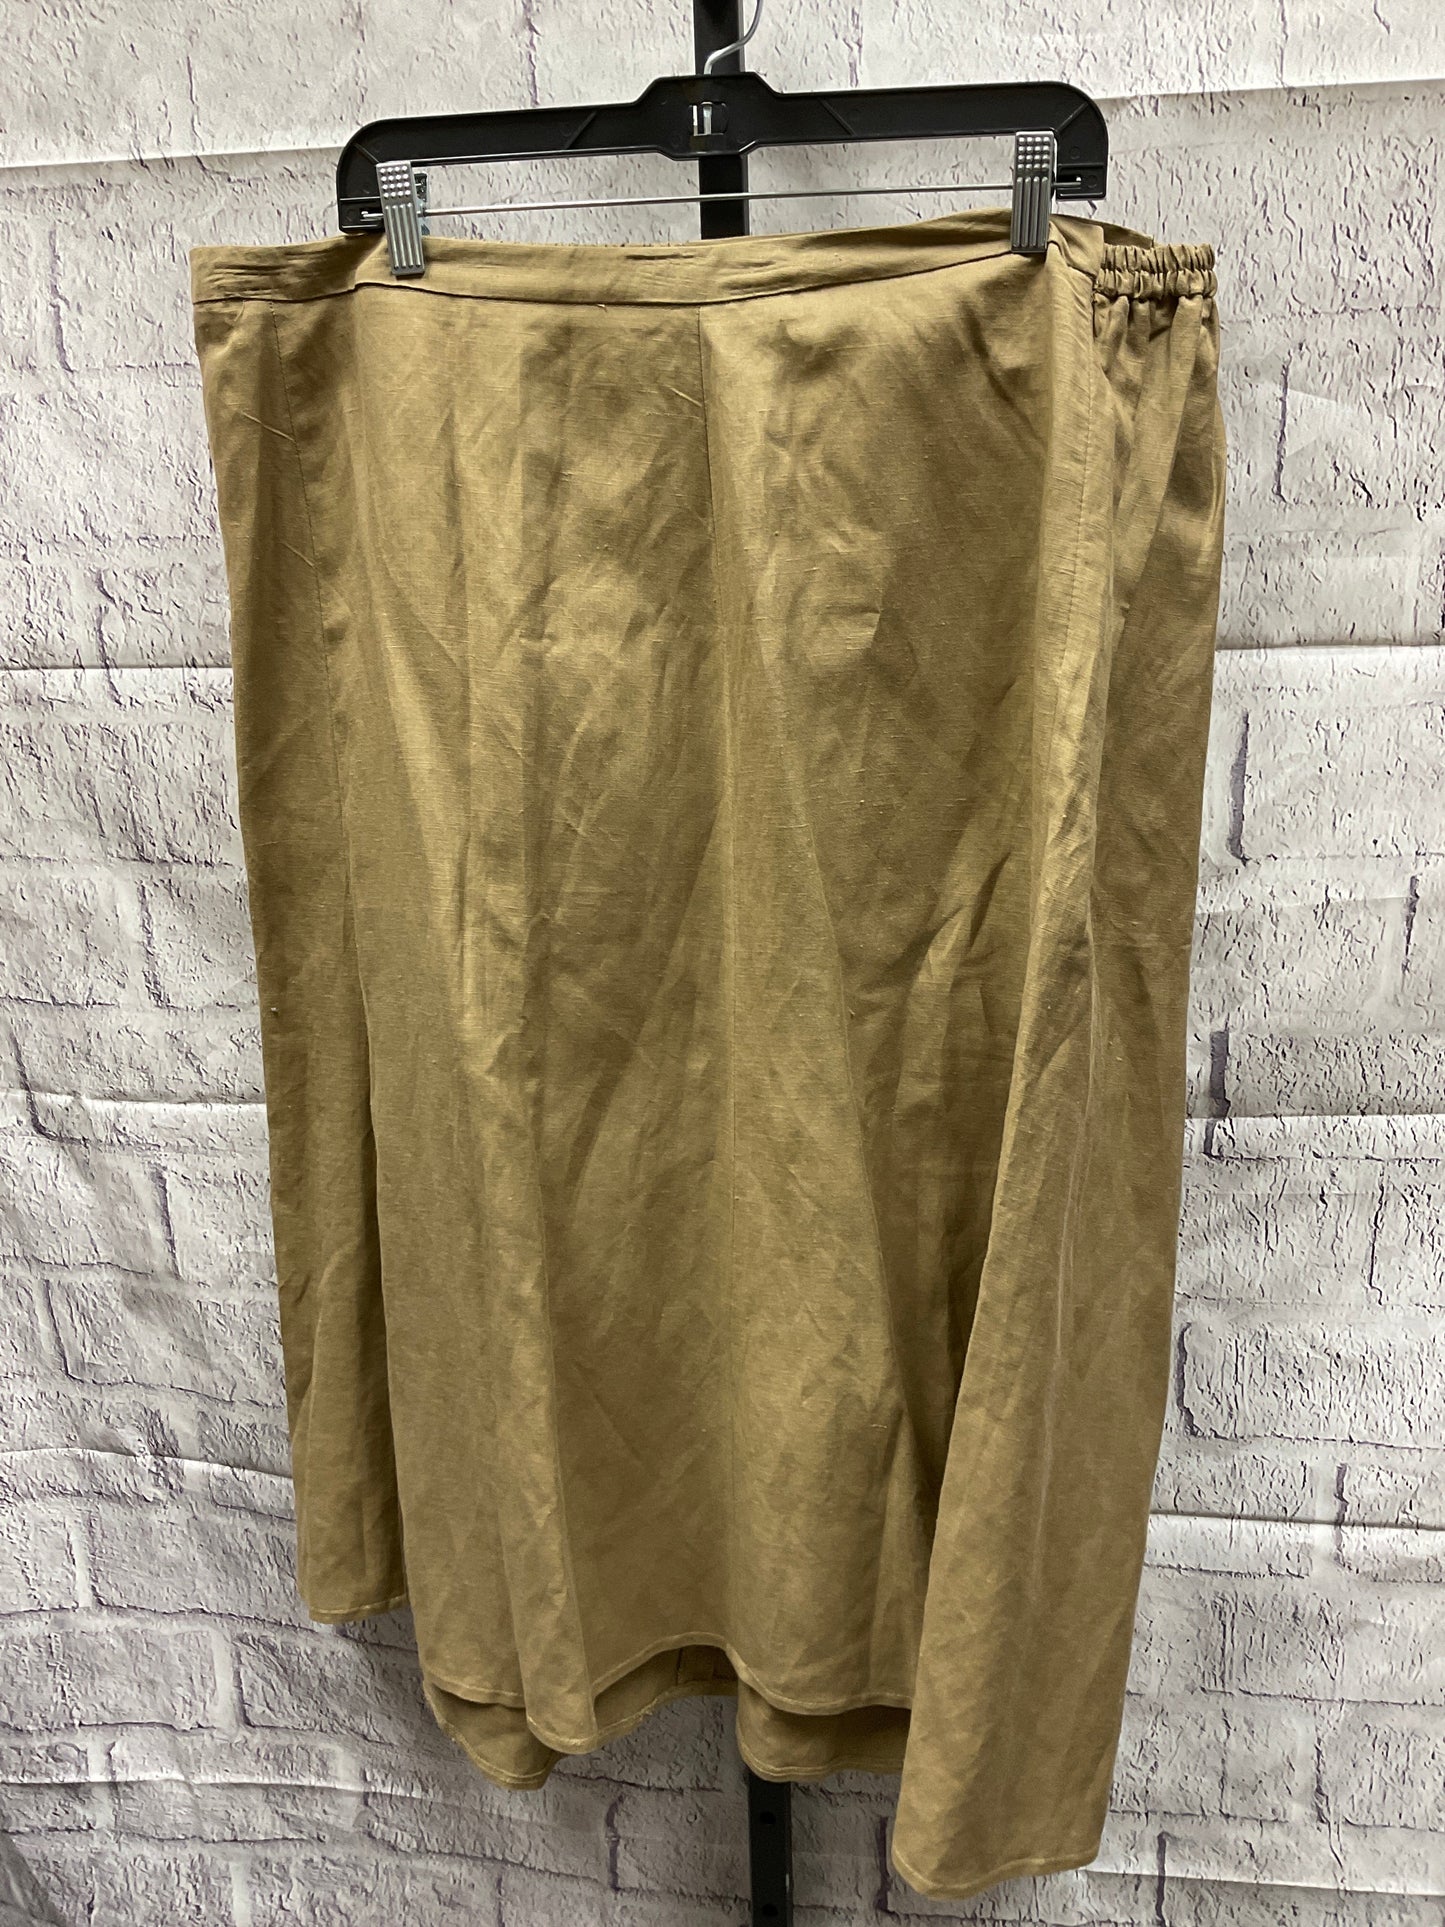 Skirt Maxi By Maggie Barnes  Size: 2x